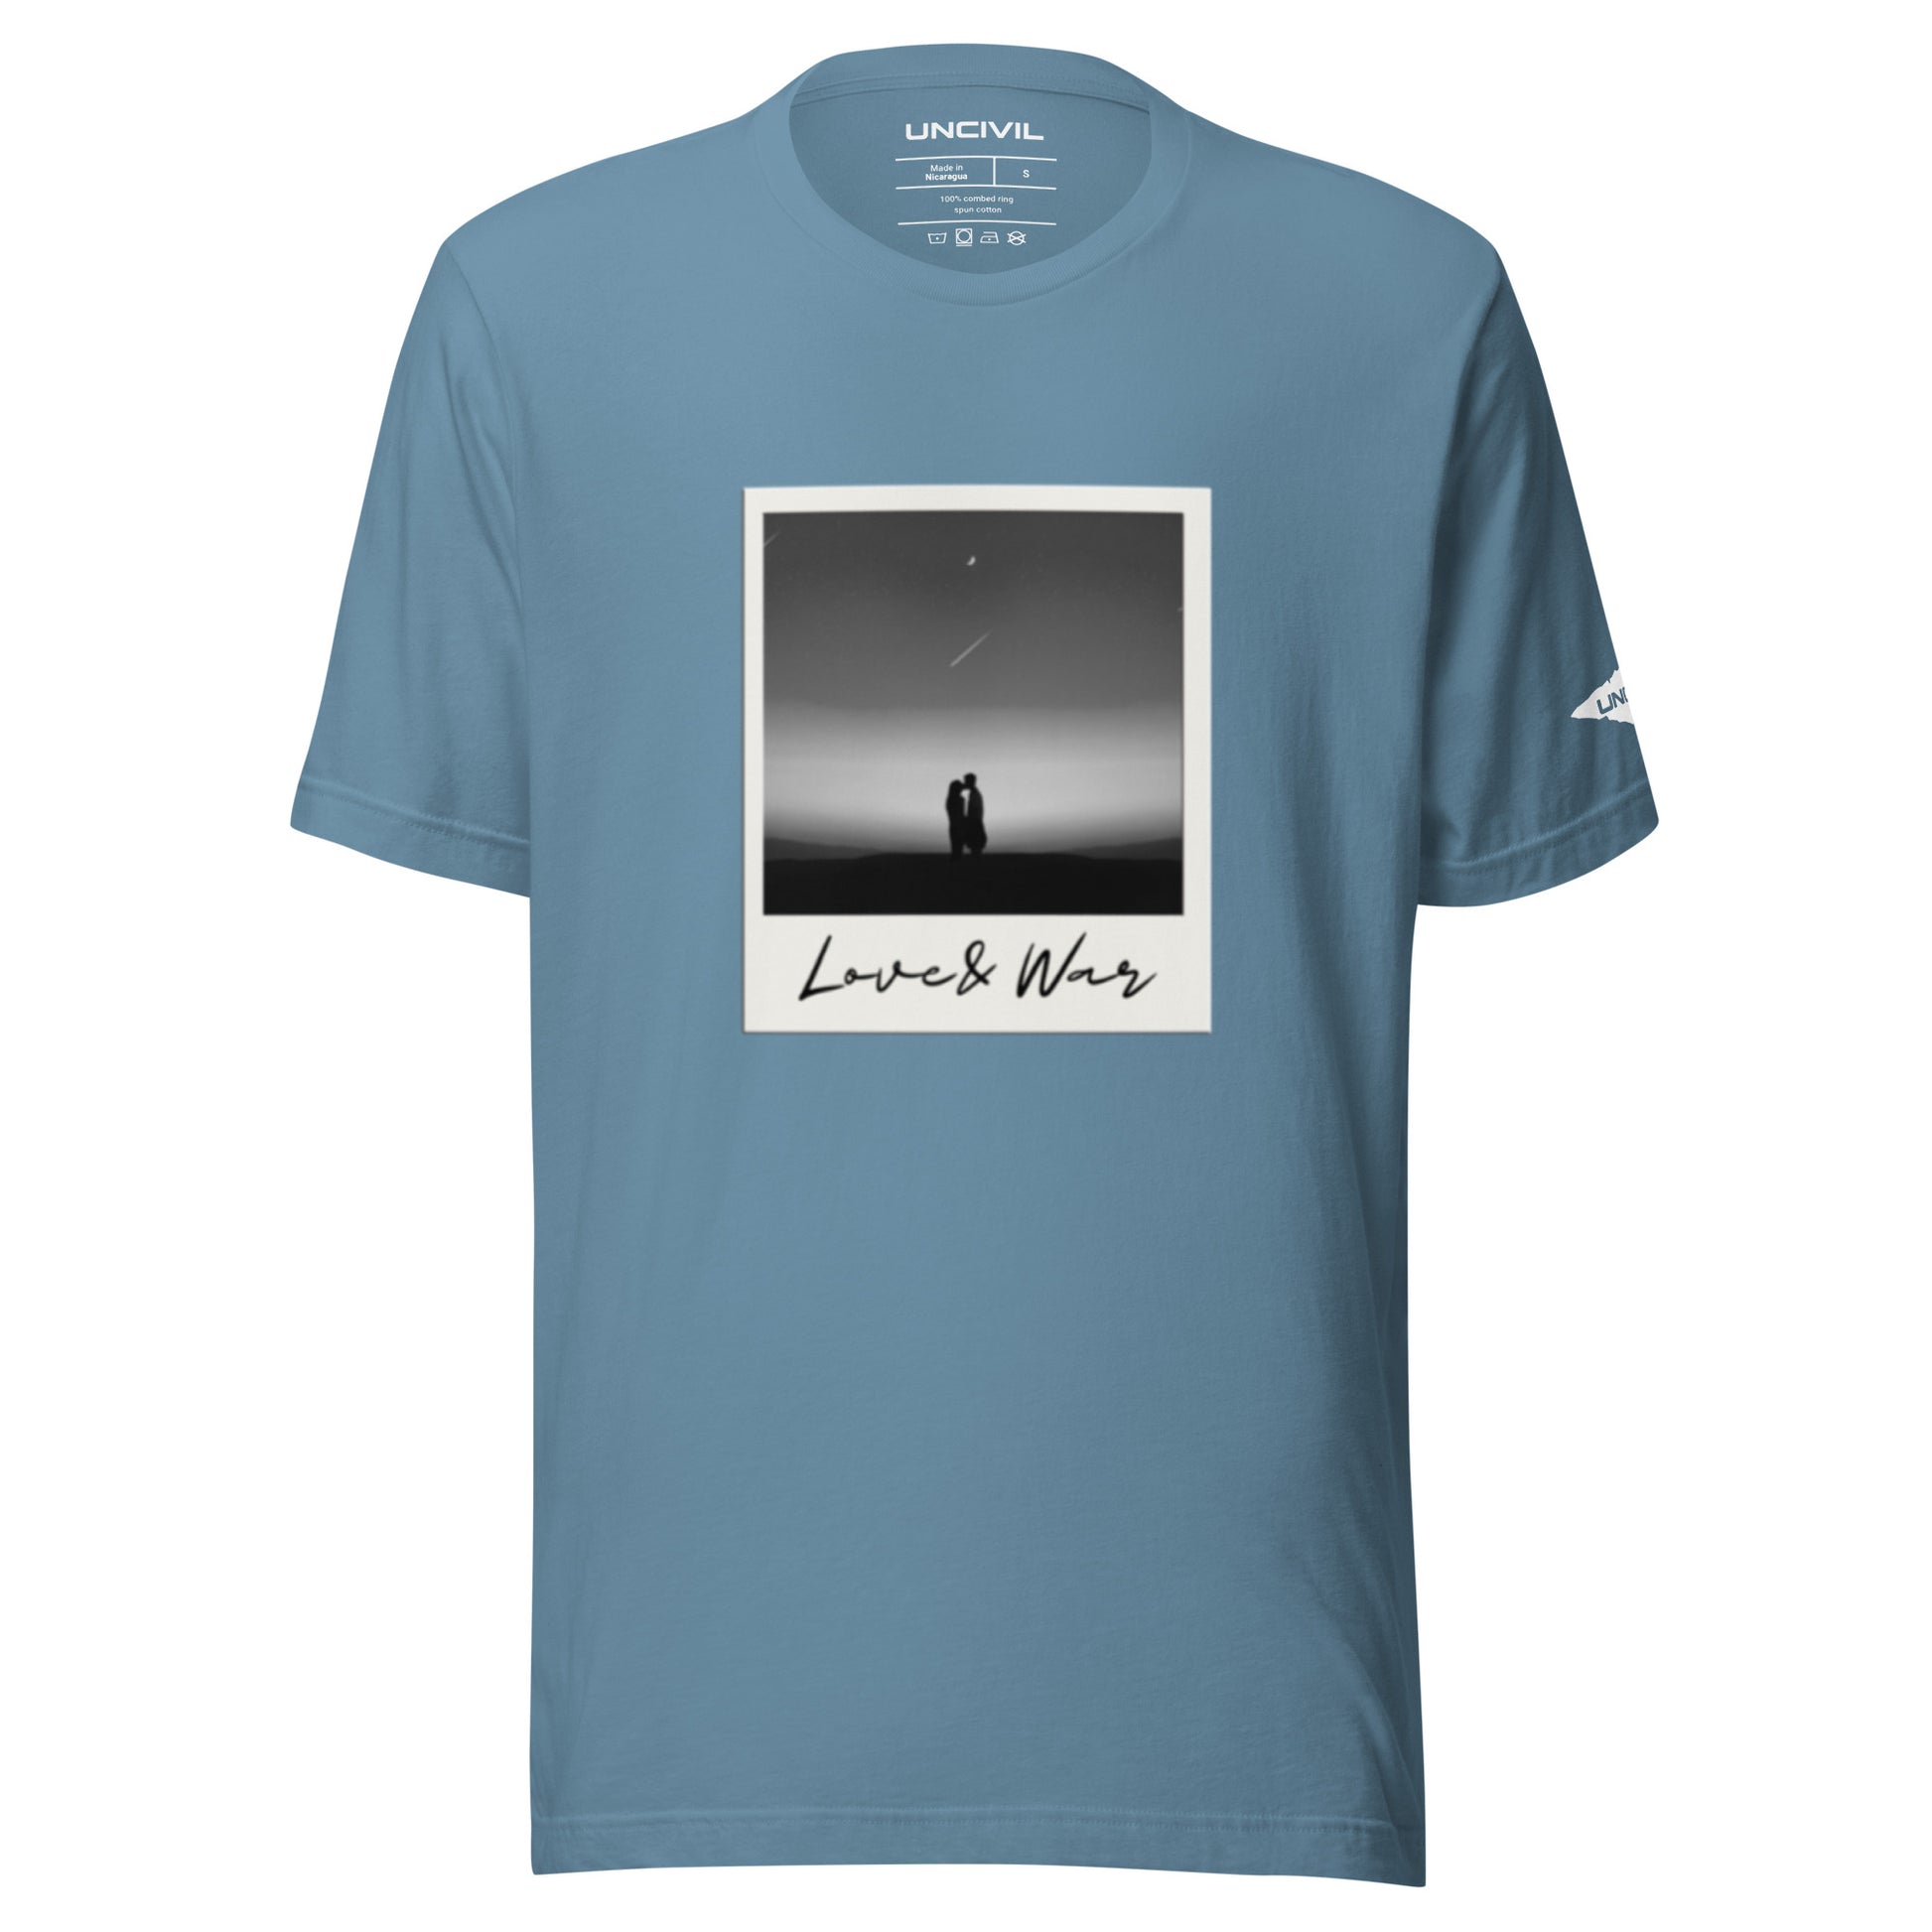 Love and War shirt. Featuring a Polaroid photo of a couple in black and white. Steel Blue unisex shirt.